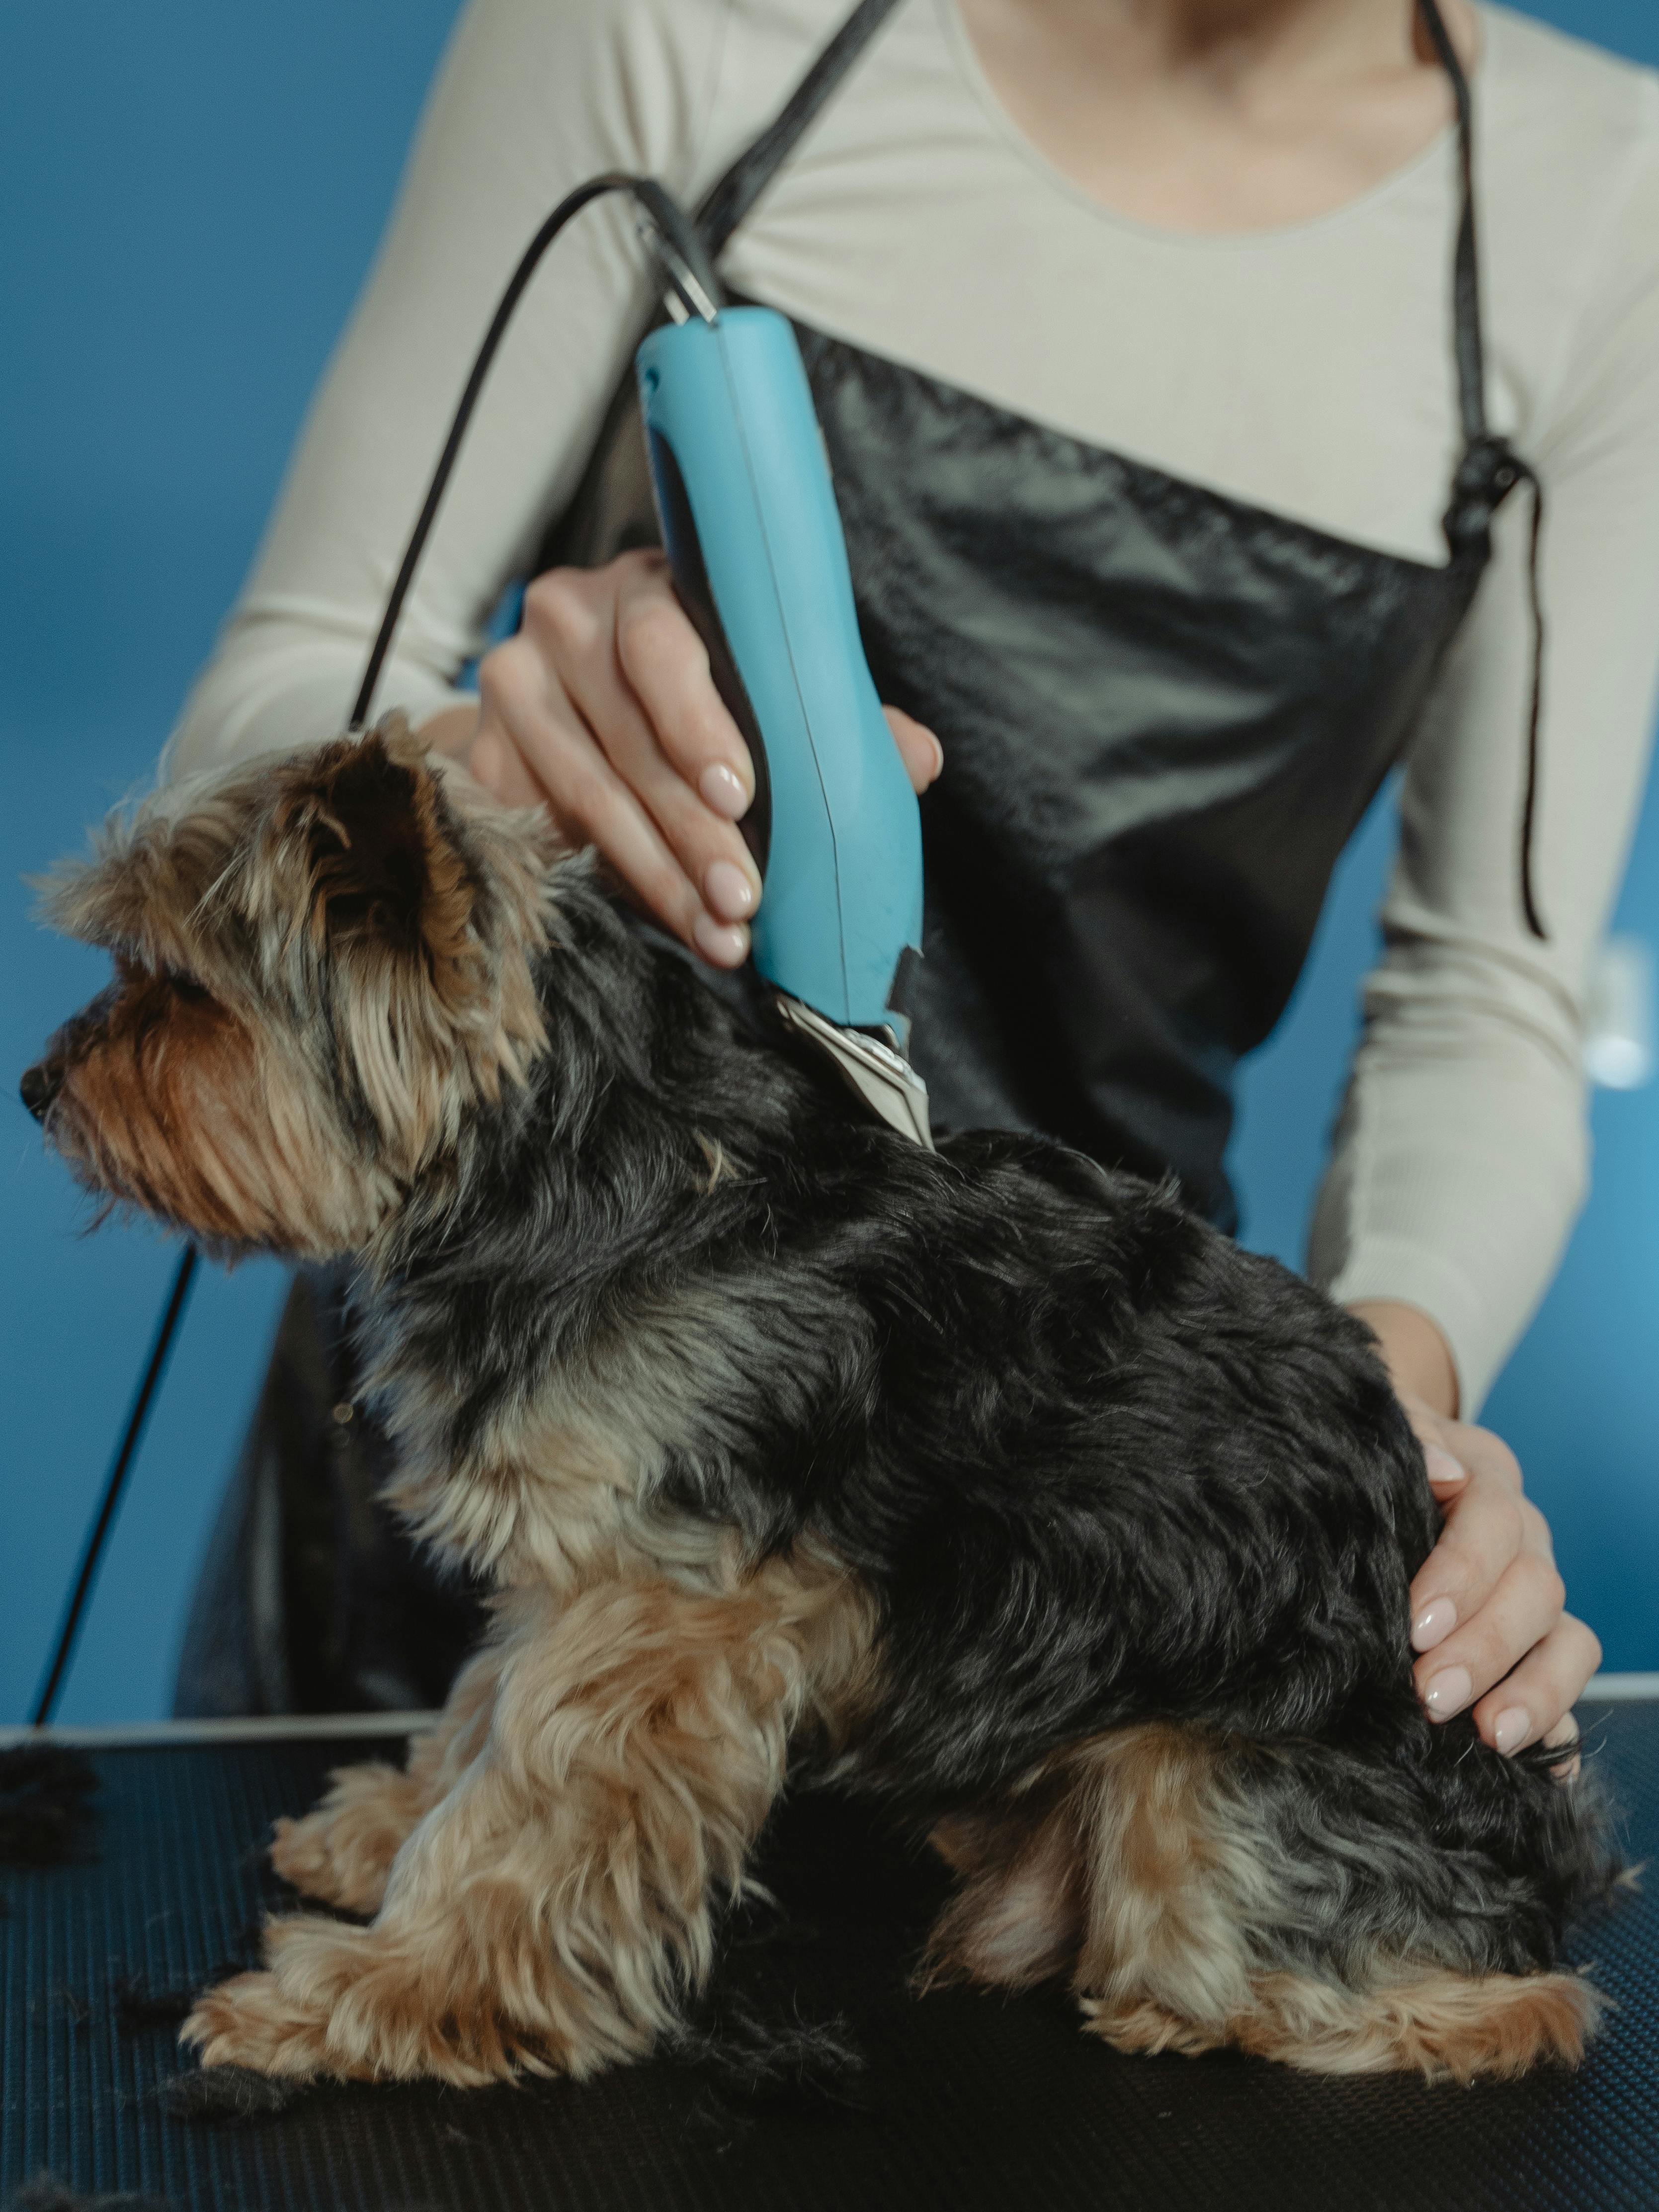 A white woman is seen from the neck down. She is wearing a black plastic apron. She uses blue clippers to trim a small black and brown dog.